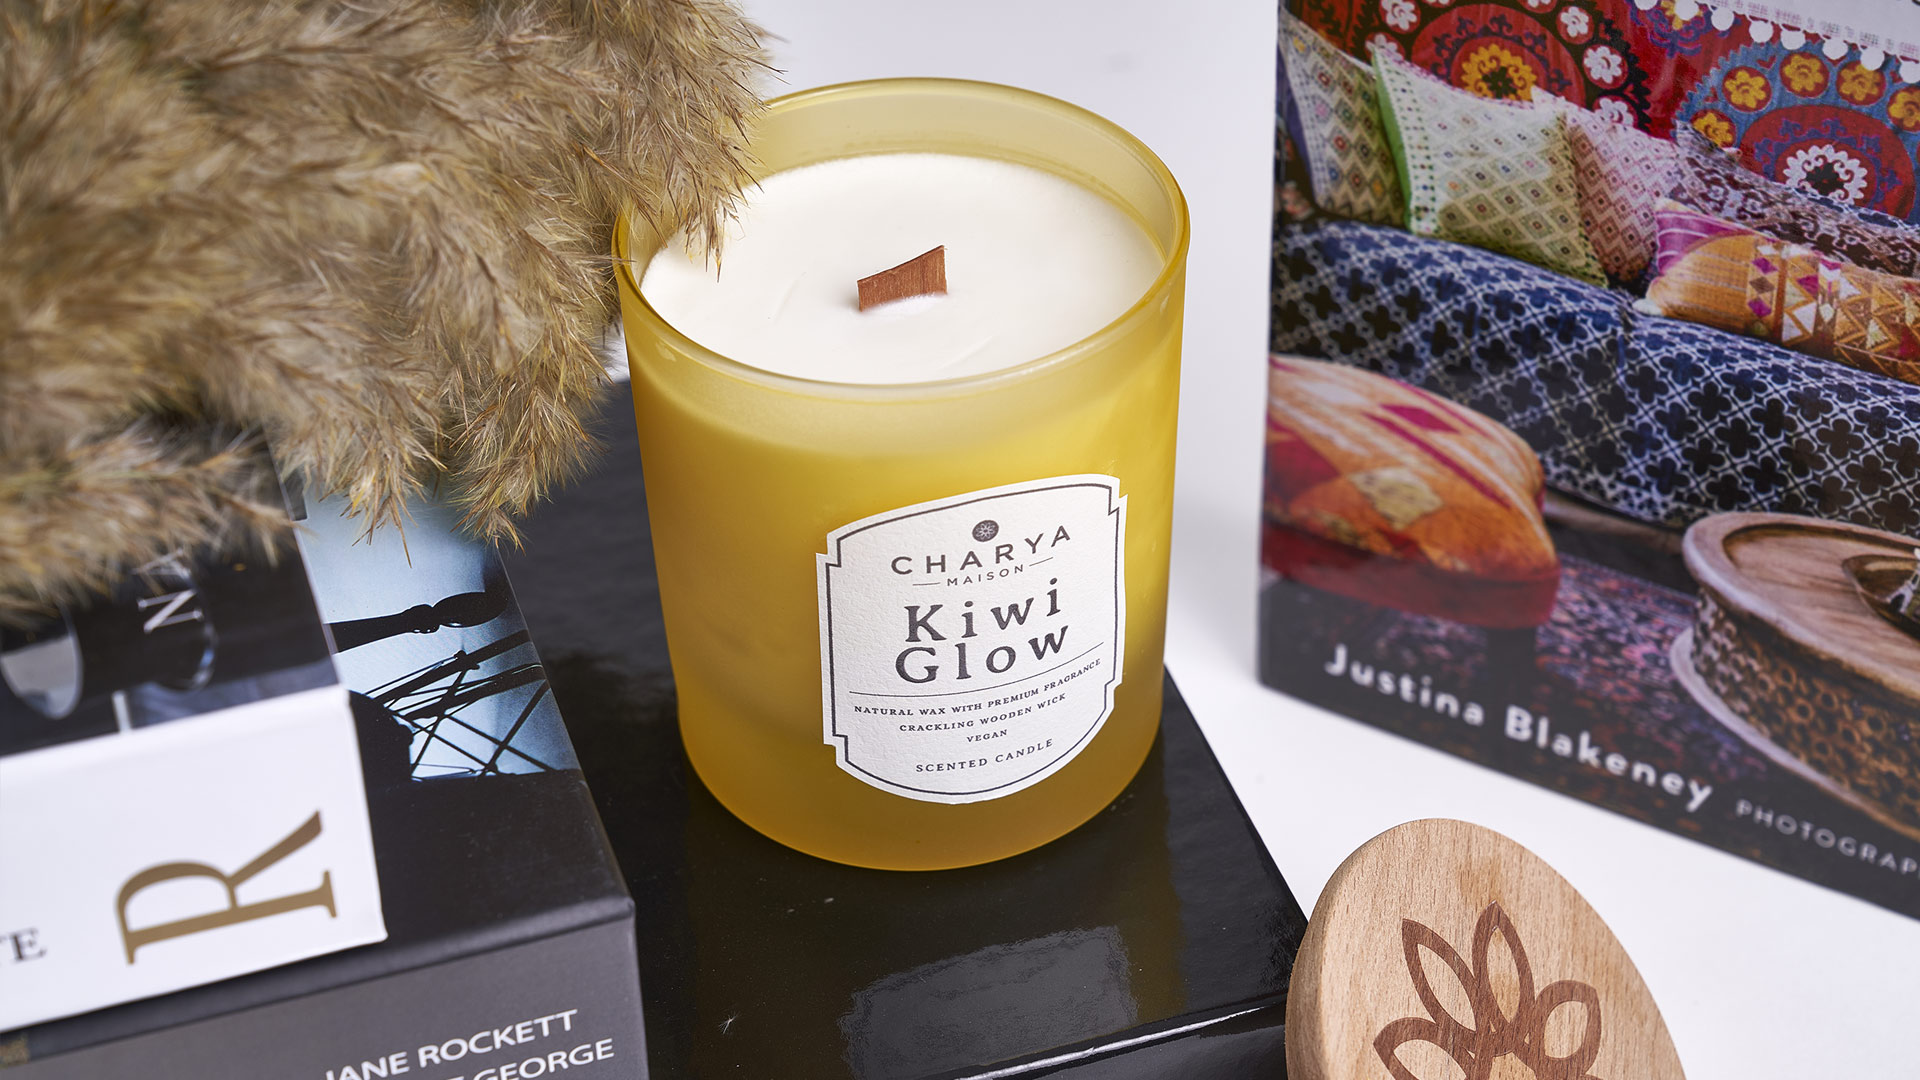 Gardenia Scent  Home Collection – Spa Candles & Scents